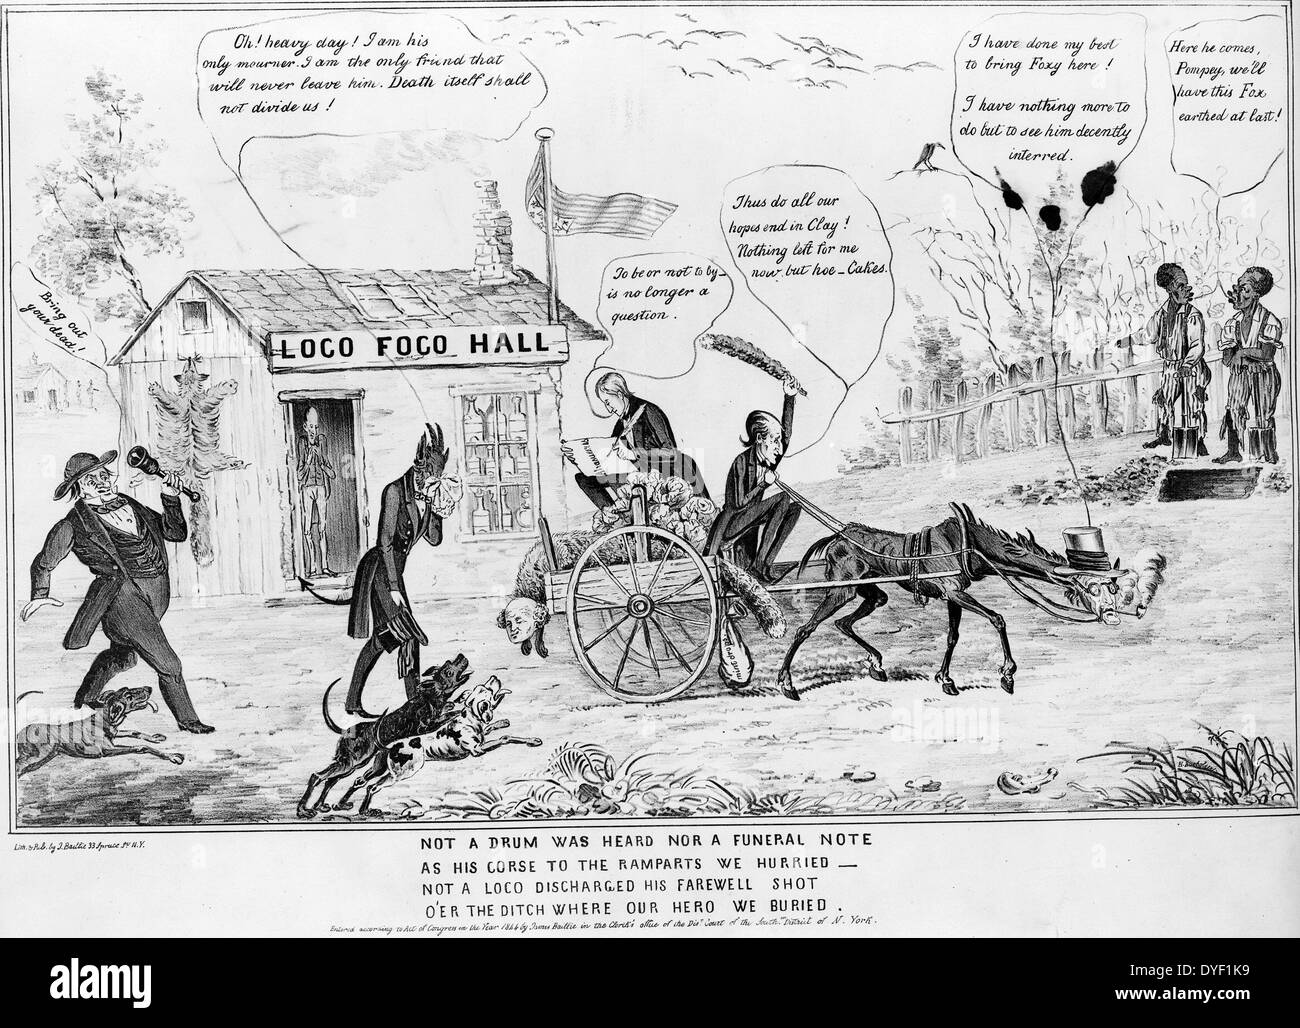 Not a drum was heard nor a funeral note... by H Bucholzer and James S. Baillie circa 1844. Lithograph print on wove paper. Political cartoon illustrating the change in support from the Democrats for presidential hopeful Martin Van Buren. In this cartoon Van Buren is portrayed as a dead fox  pulled on a cart by Andrew Jackson (as a scrawny nag). Just behind the cart walks a devil, speaking through sobs, 'Oh! heavy day! I am his only mourner. I am the only friend that will never leave him. Death itself shall not divide us!' Stock Photo